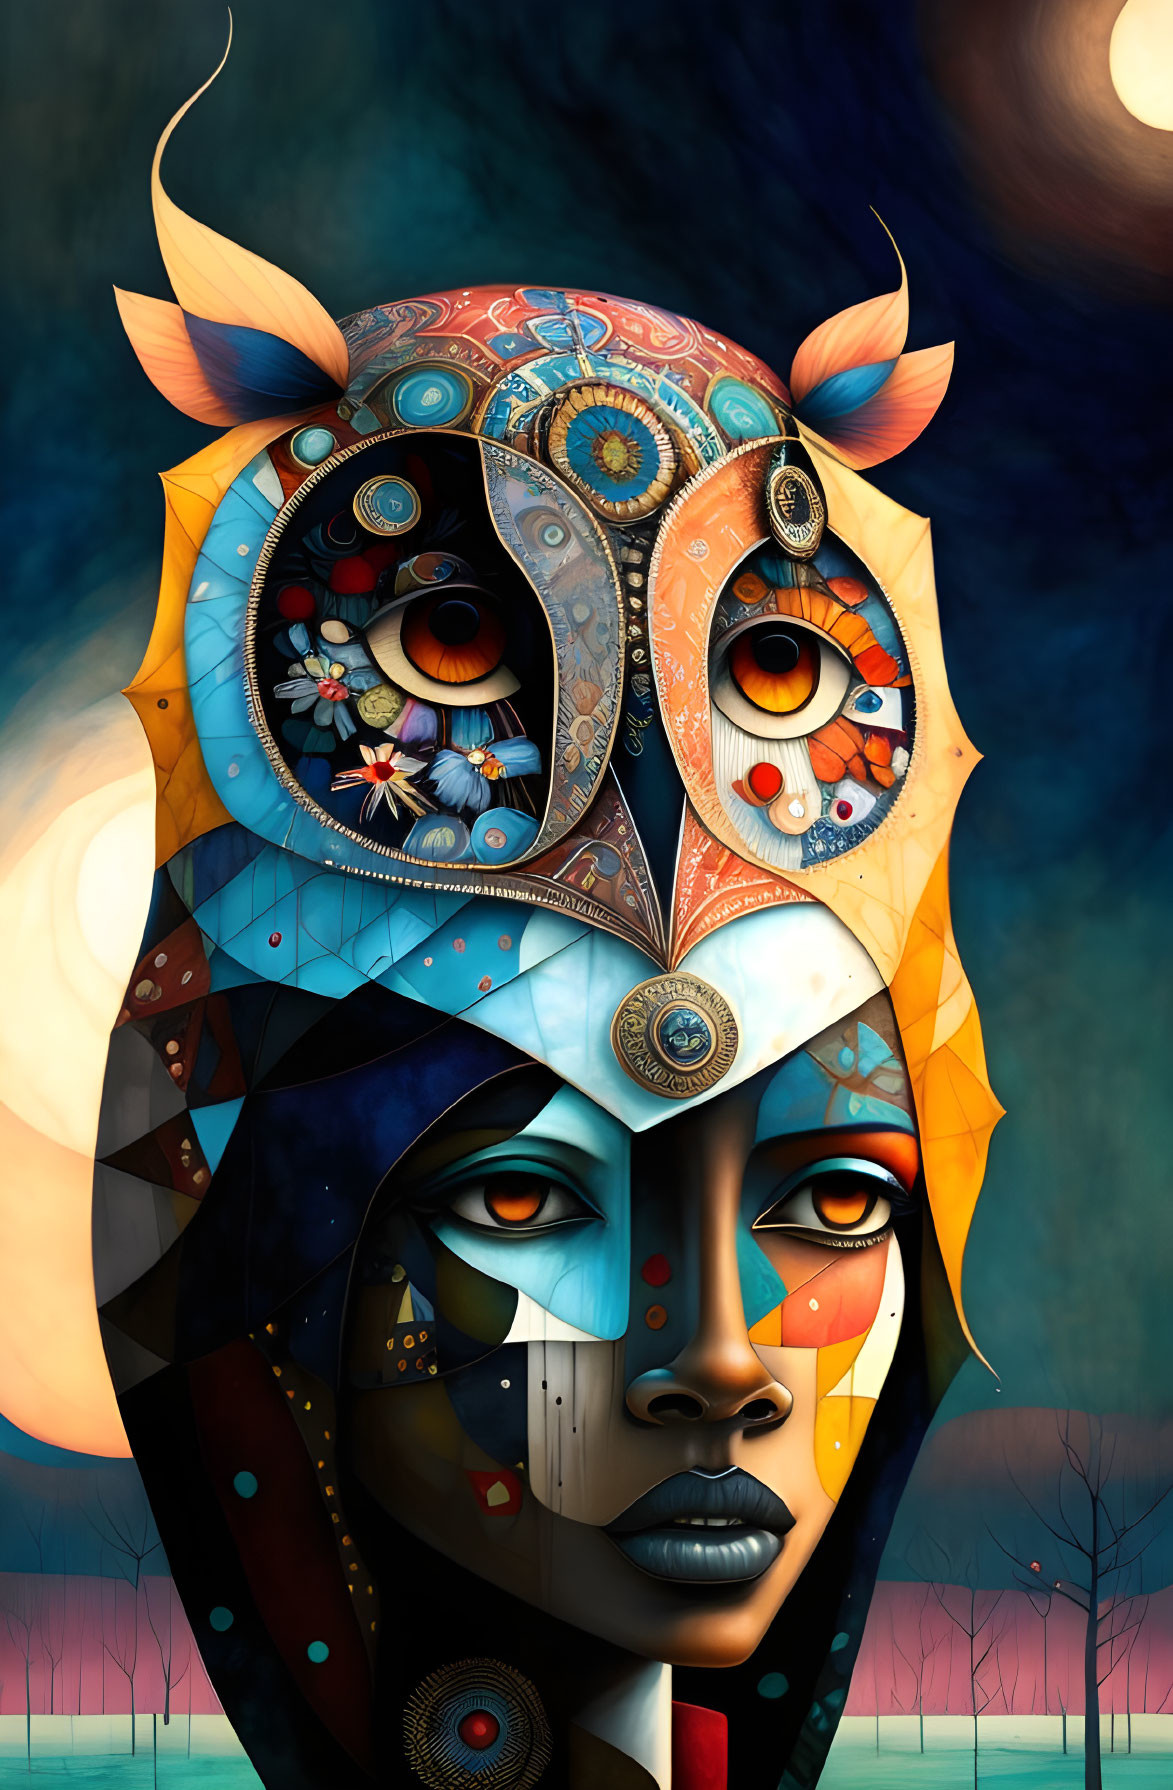 Colorful surreal portrait of a woman with ornate owl mask in evening landscape